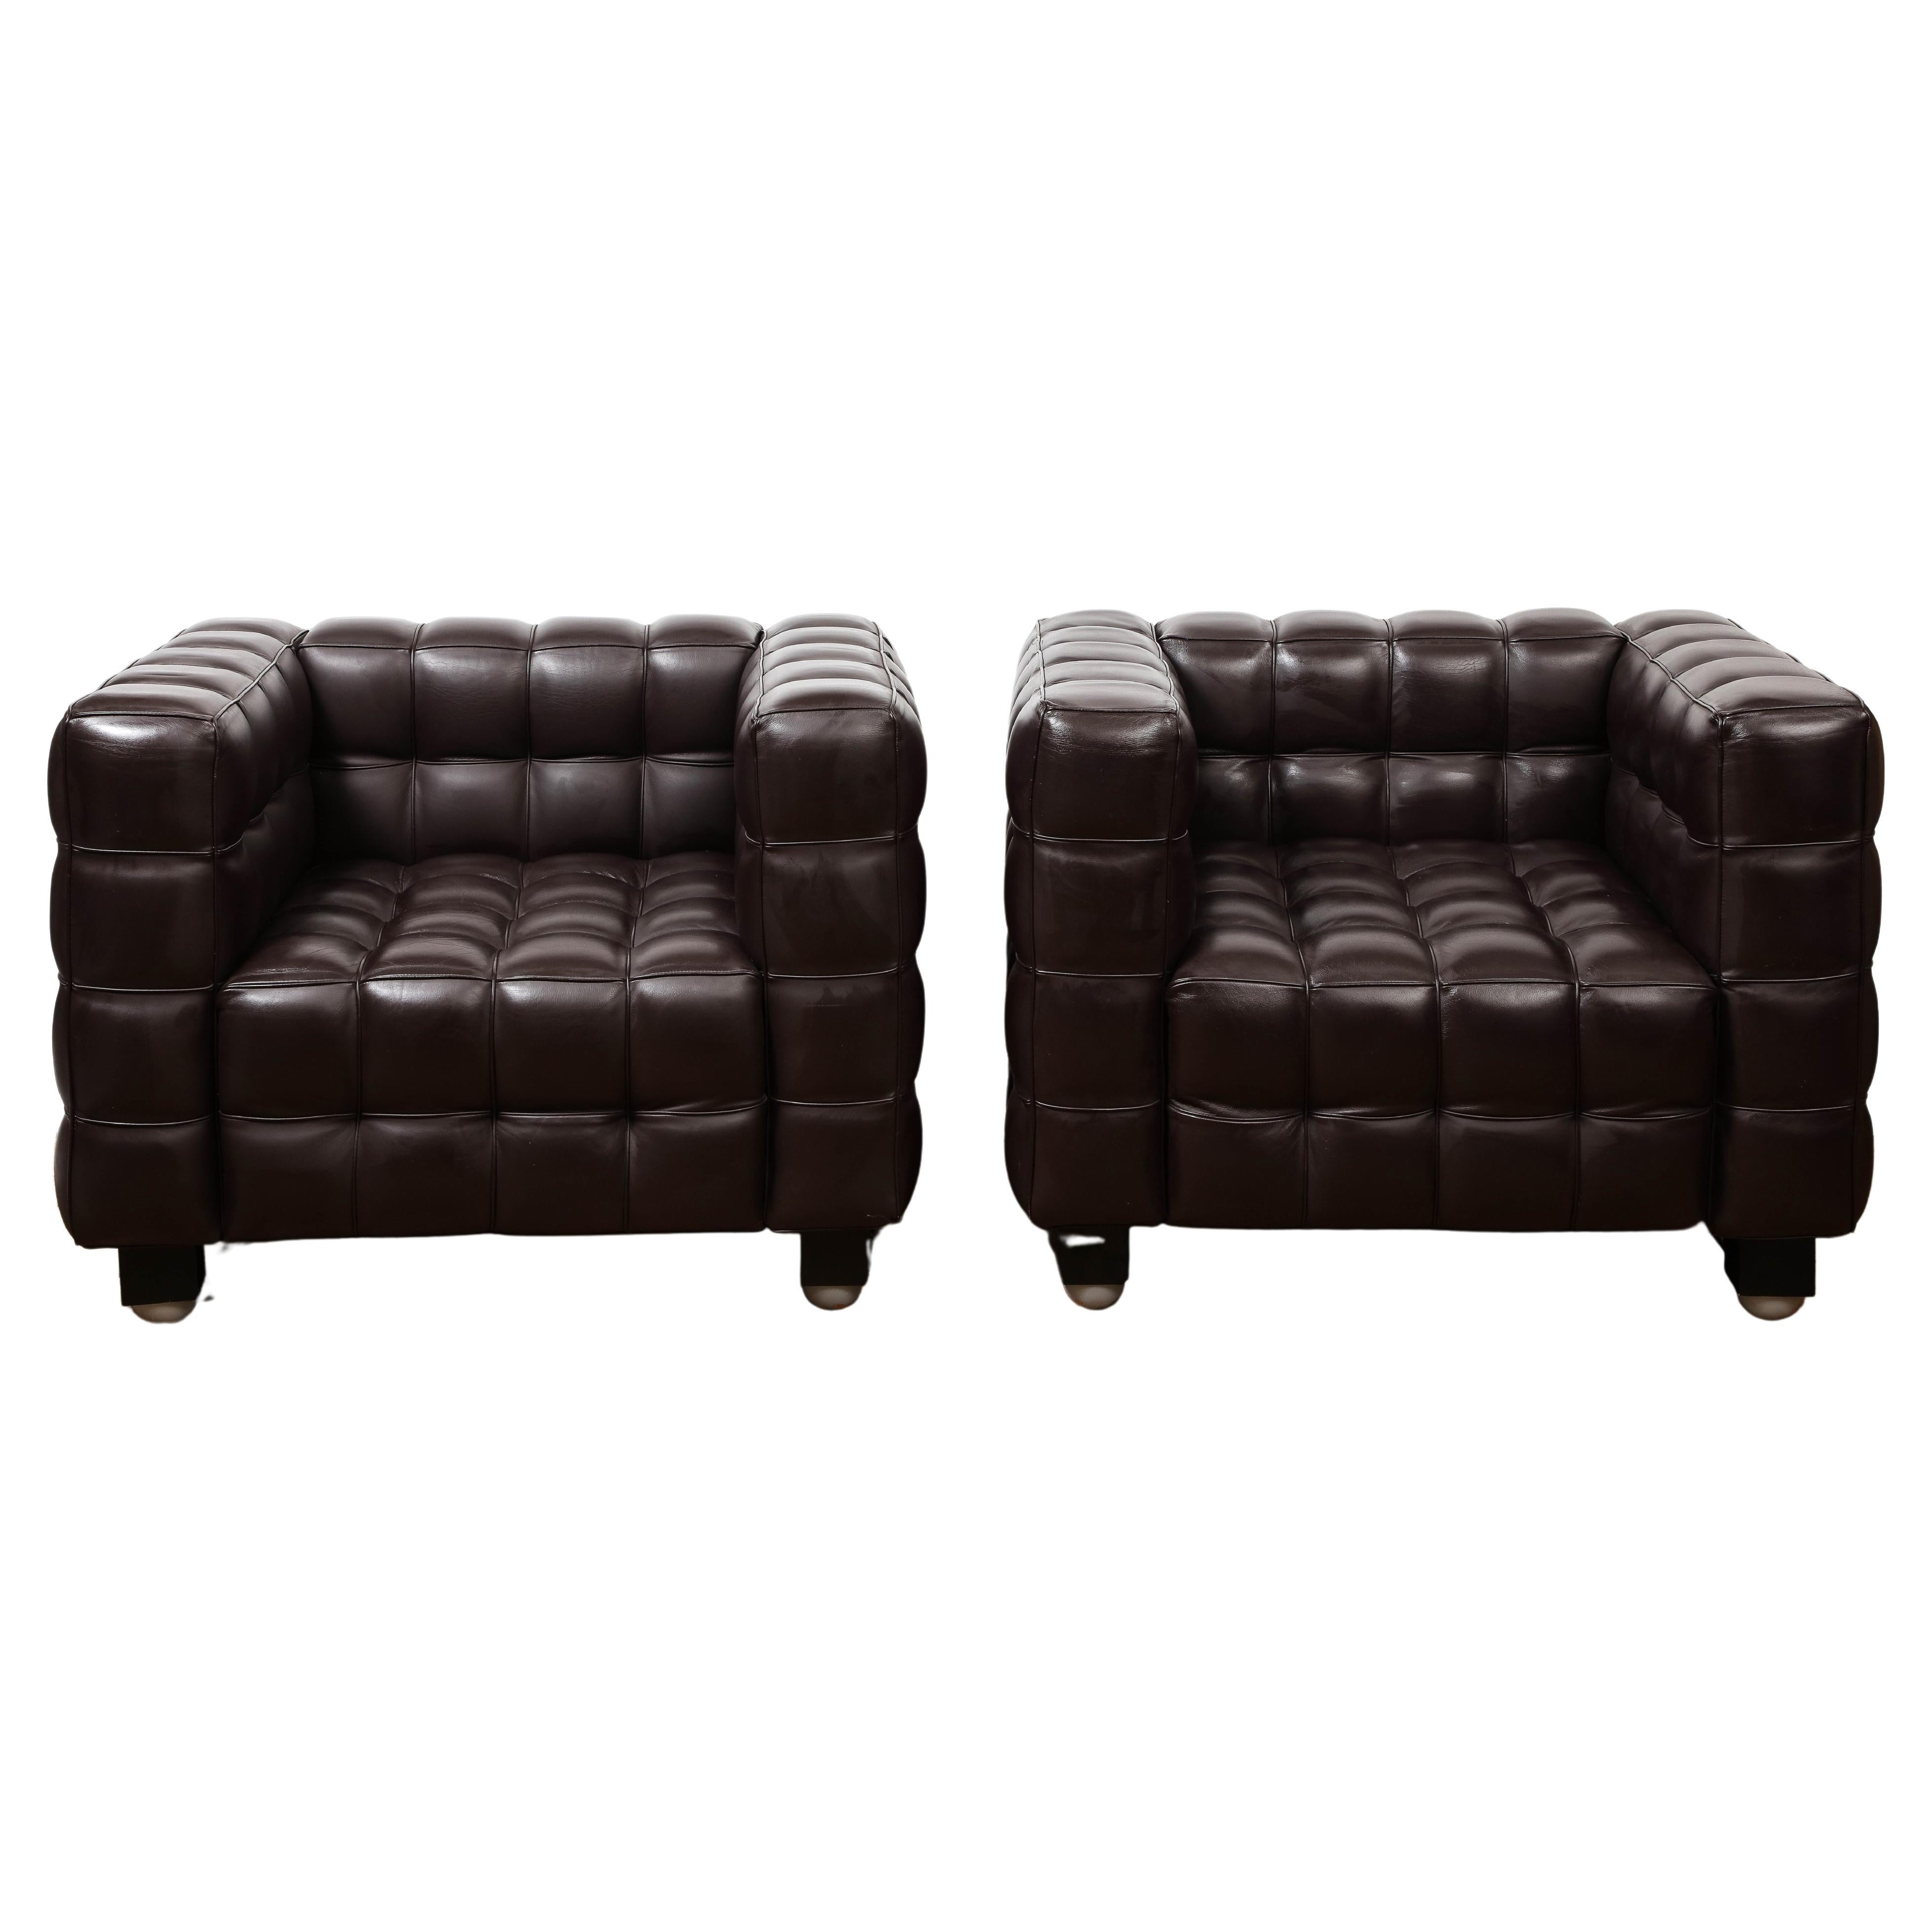 Pair of Josef Hoffmann for Wittmann Kubus Chairs in Dark Brown Leather